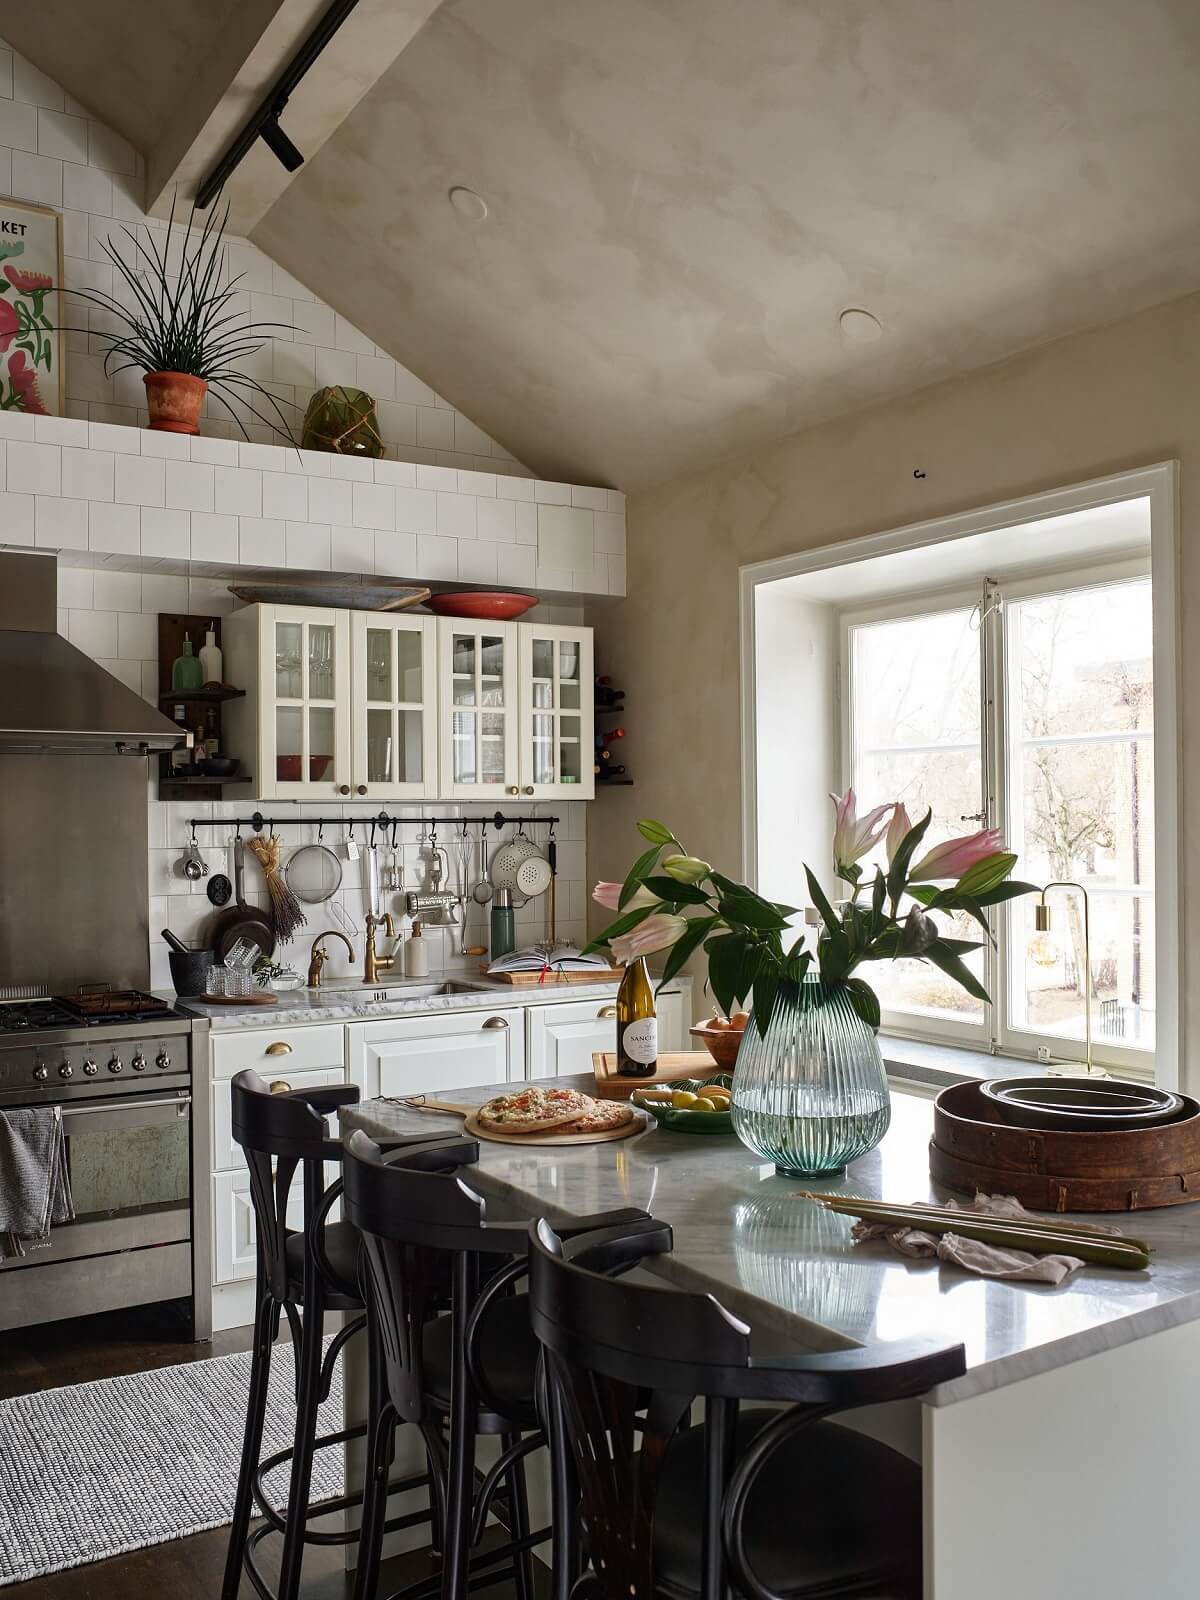 A Swedish Maisonette with a Charming Kitchen